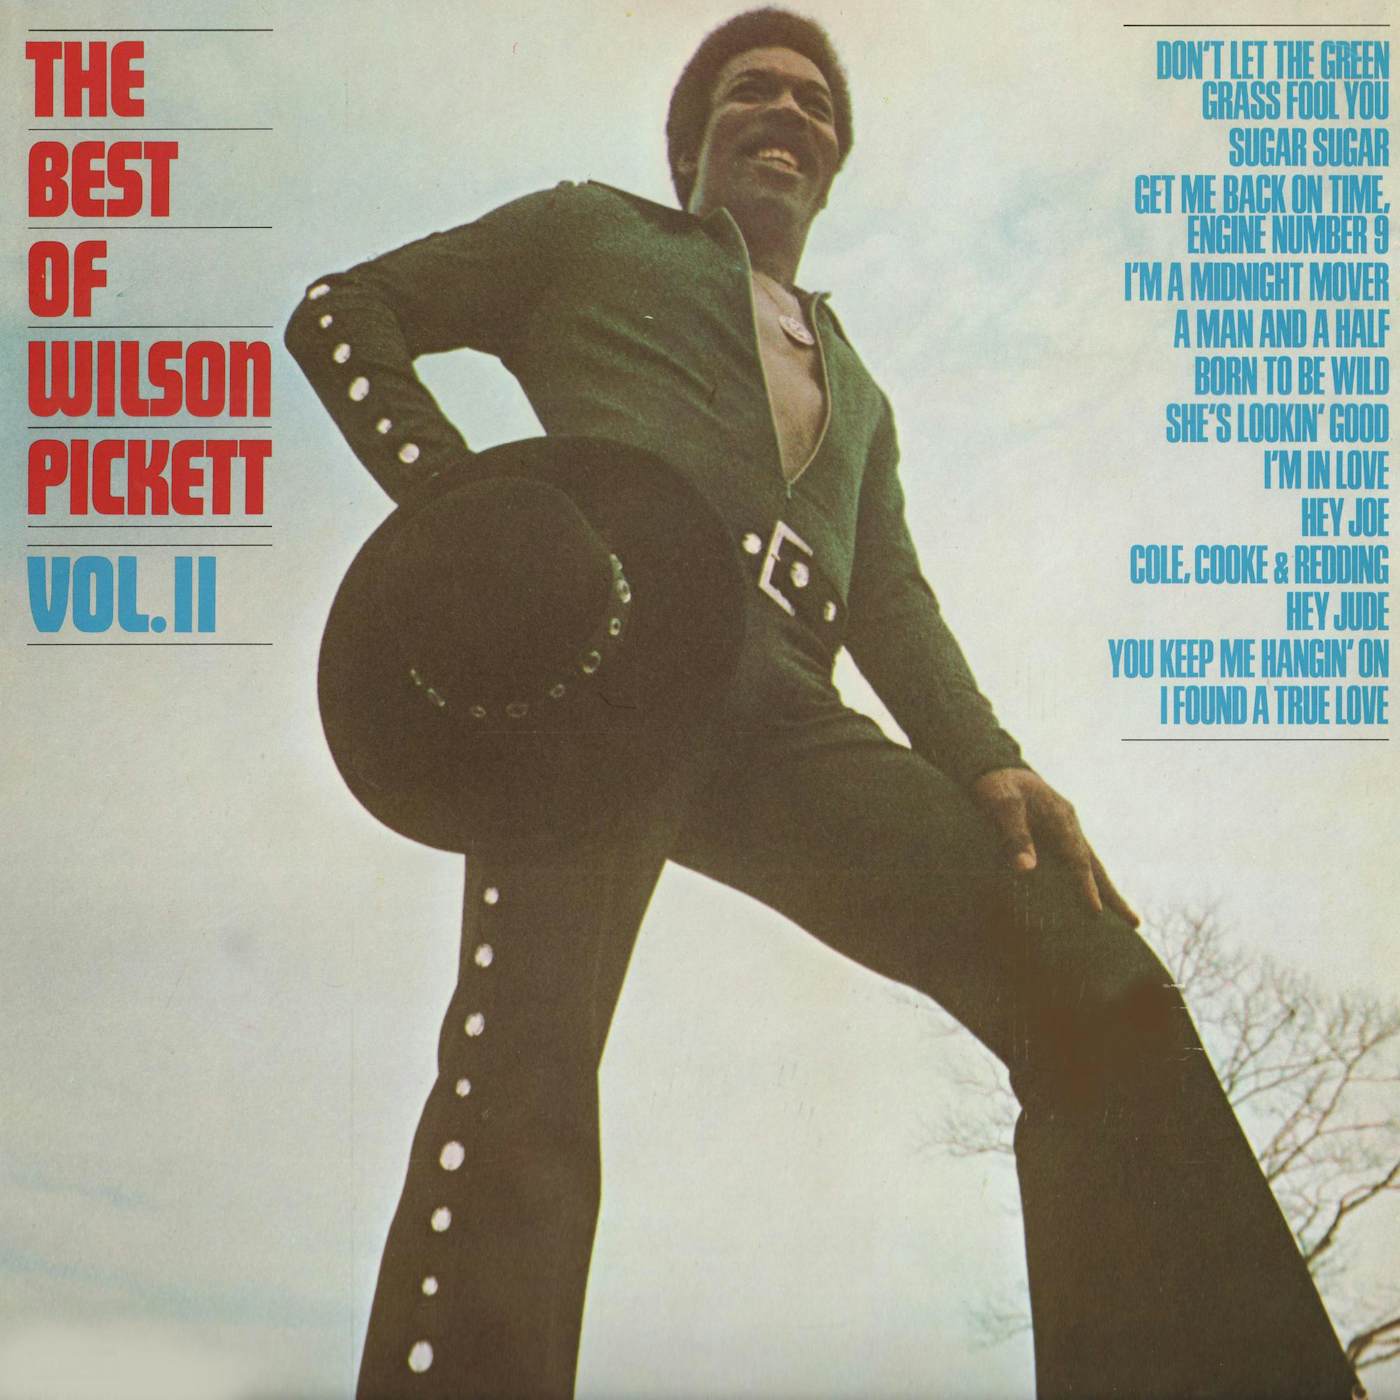 BEST OF WILSON PICKETT VOLUME TWO (180G/LIMITED EDITION) Vinyl Record